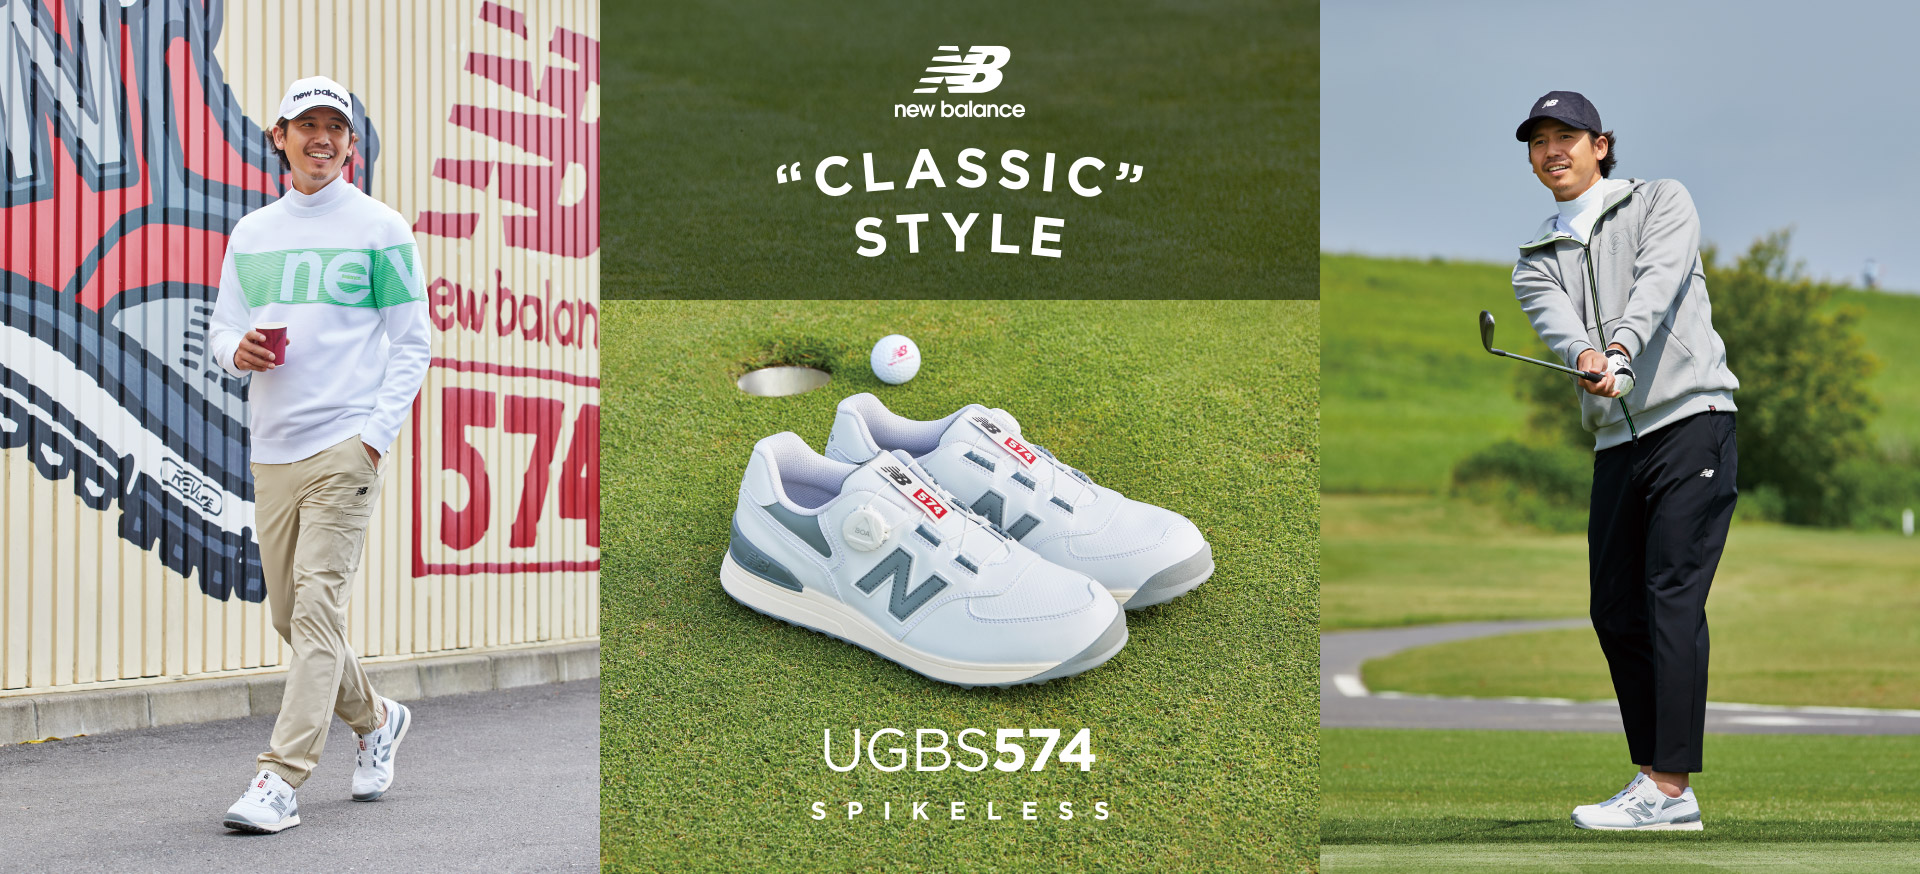 Classic Style, UGBS574 Spikeless